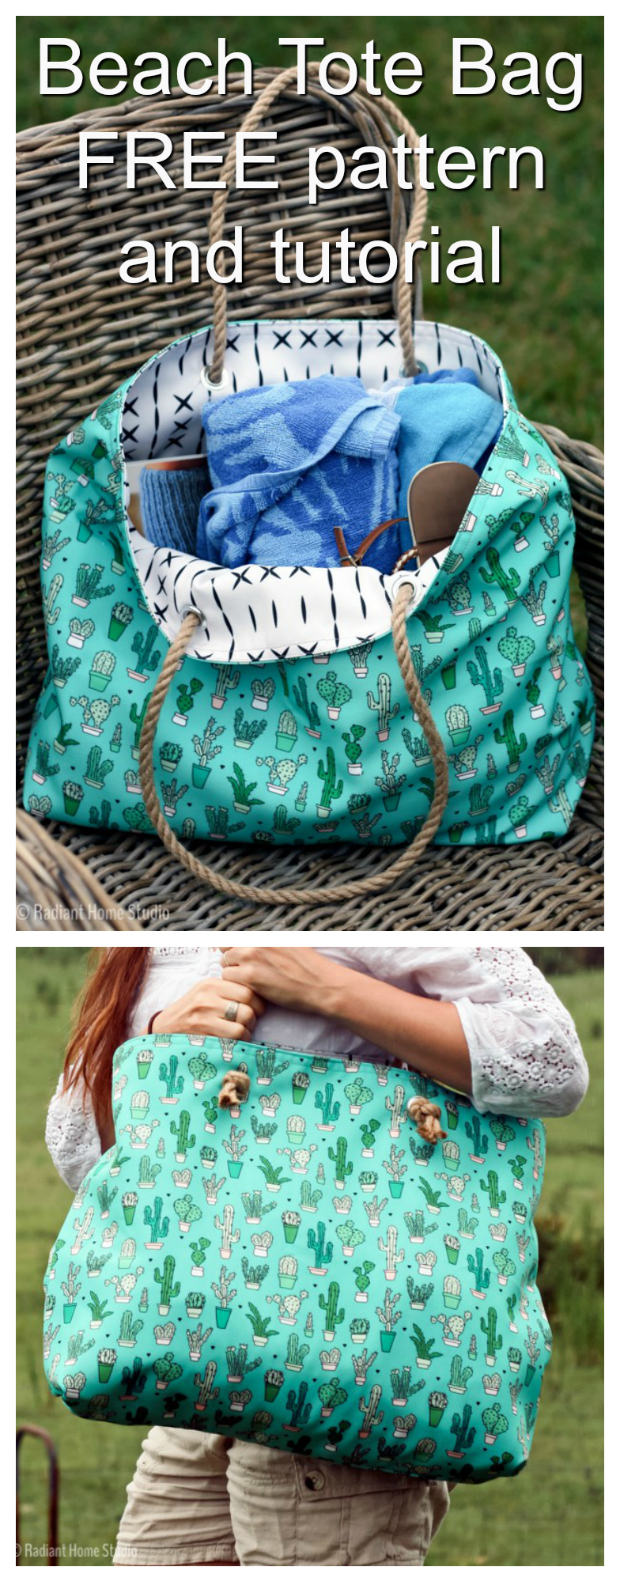 Having a day at the beach is always a great idea. Well, now you can make yourself this wonderful Beach Tote Bag with this FREE pattern and tutorial. The bag is a simple tote bag, with one full-width pocket that is divided into 3 sections. If you want more pockets, just repeat the pocket directions for the other side of the bag. The fun rope handles are simply threaded through grommets and knotted. Detailed directions for attaching the grommets have been included but if you want a simple alternative you can use buttonholes instead.